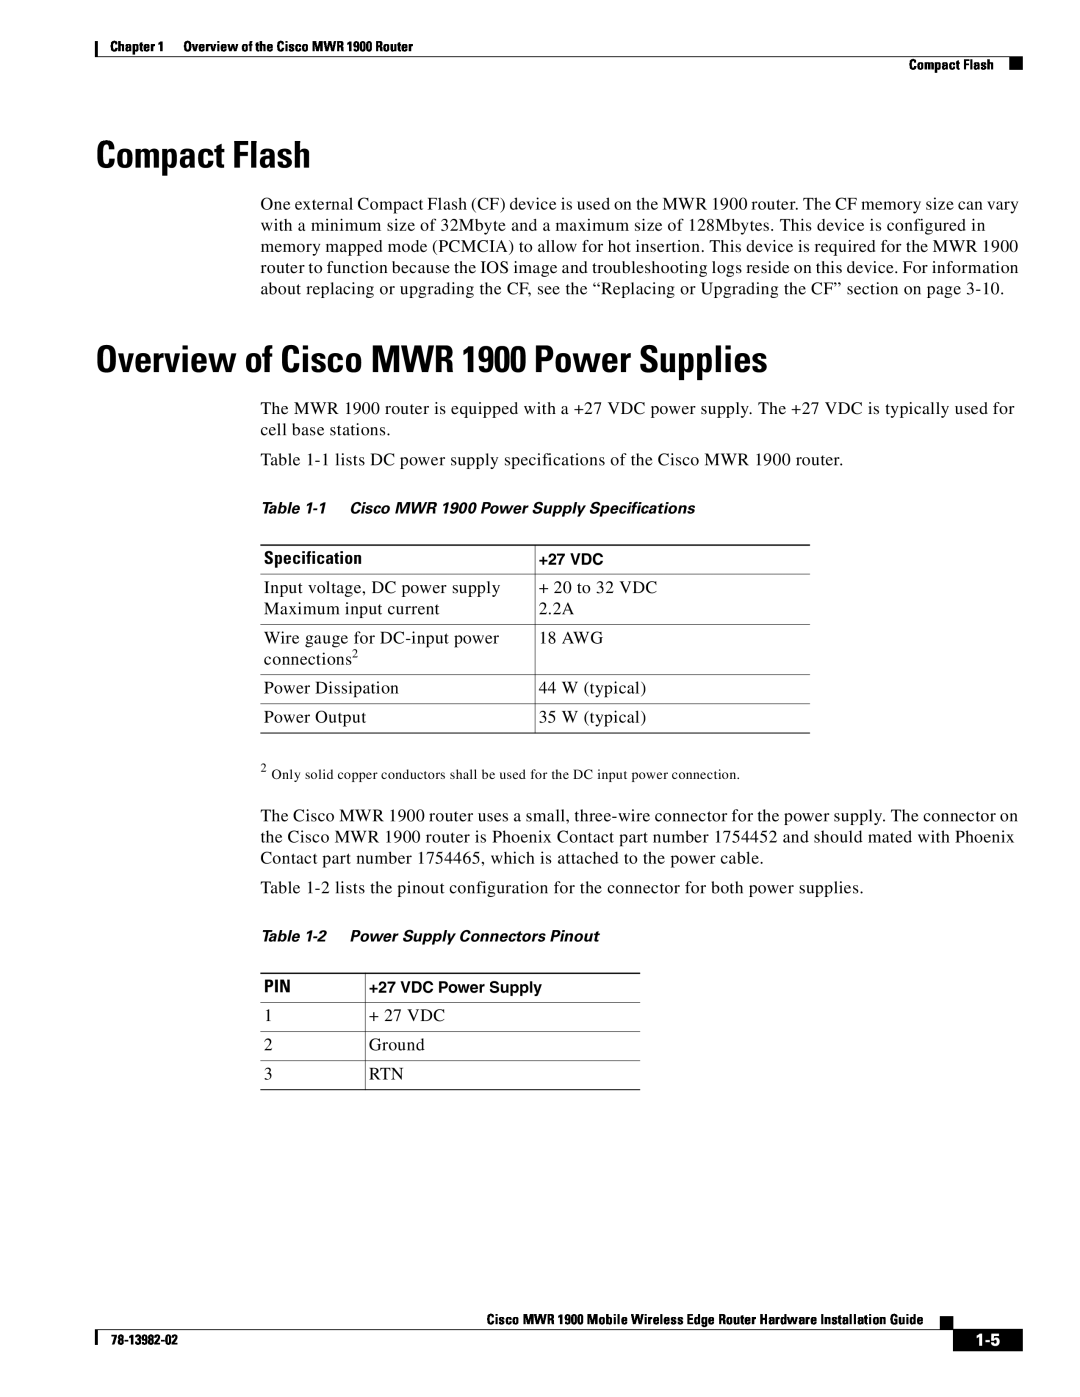 Cisco Systems manual Compact Flash, Overview of Cisco MWR 1900 Power Supplies, Specification 